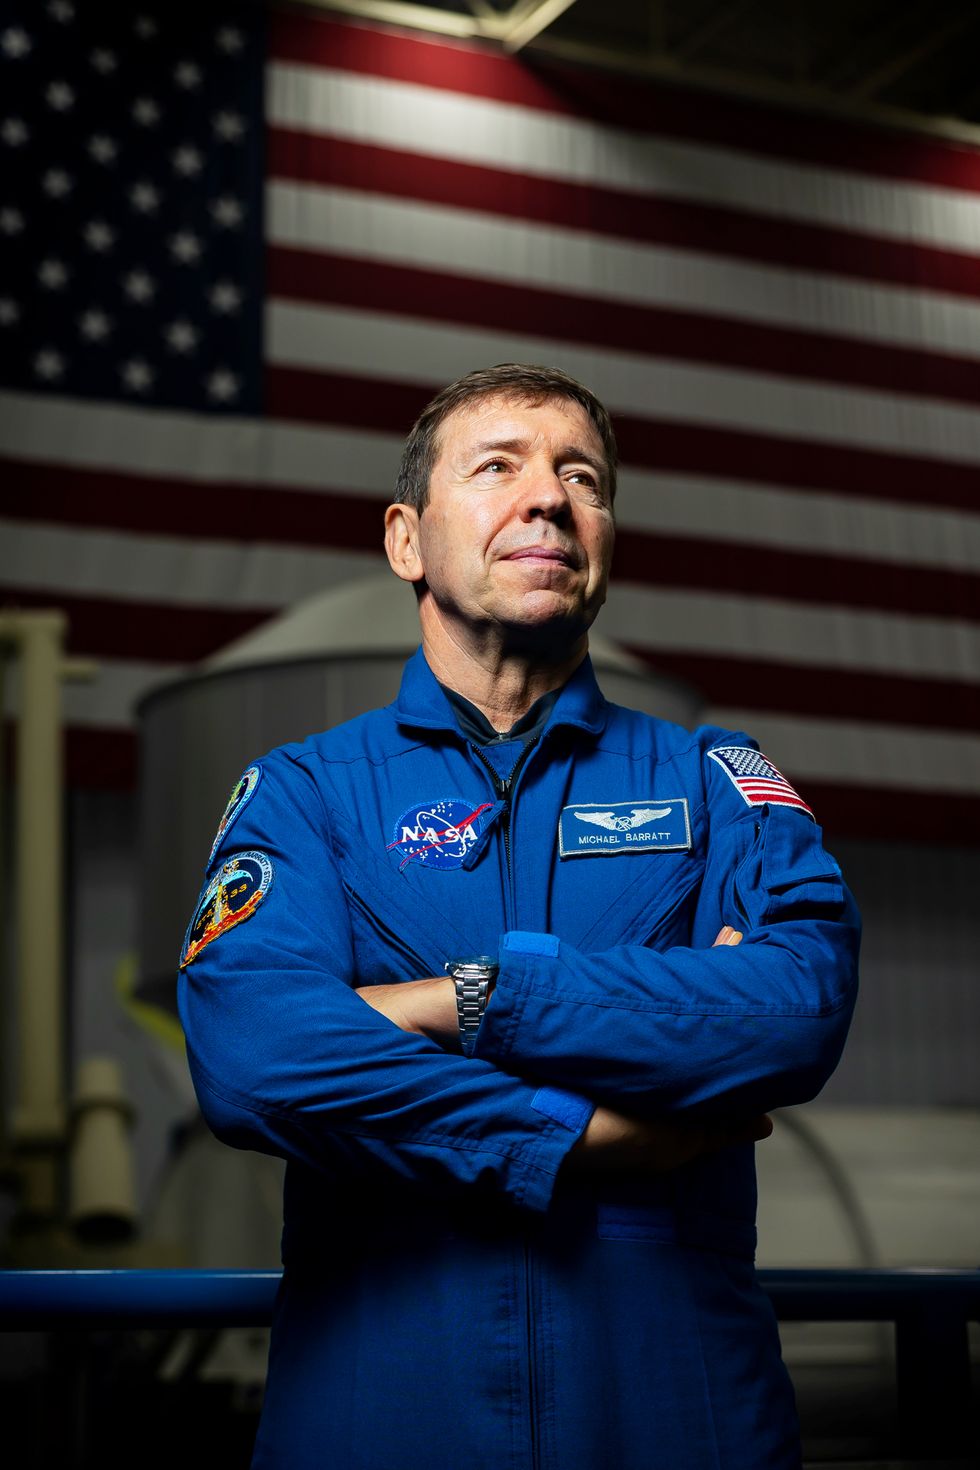 astronaut and physician michael barratt, former head of nasa’s human research program at the johnson space center in houston